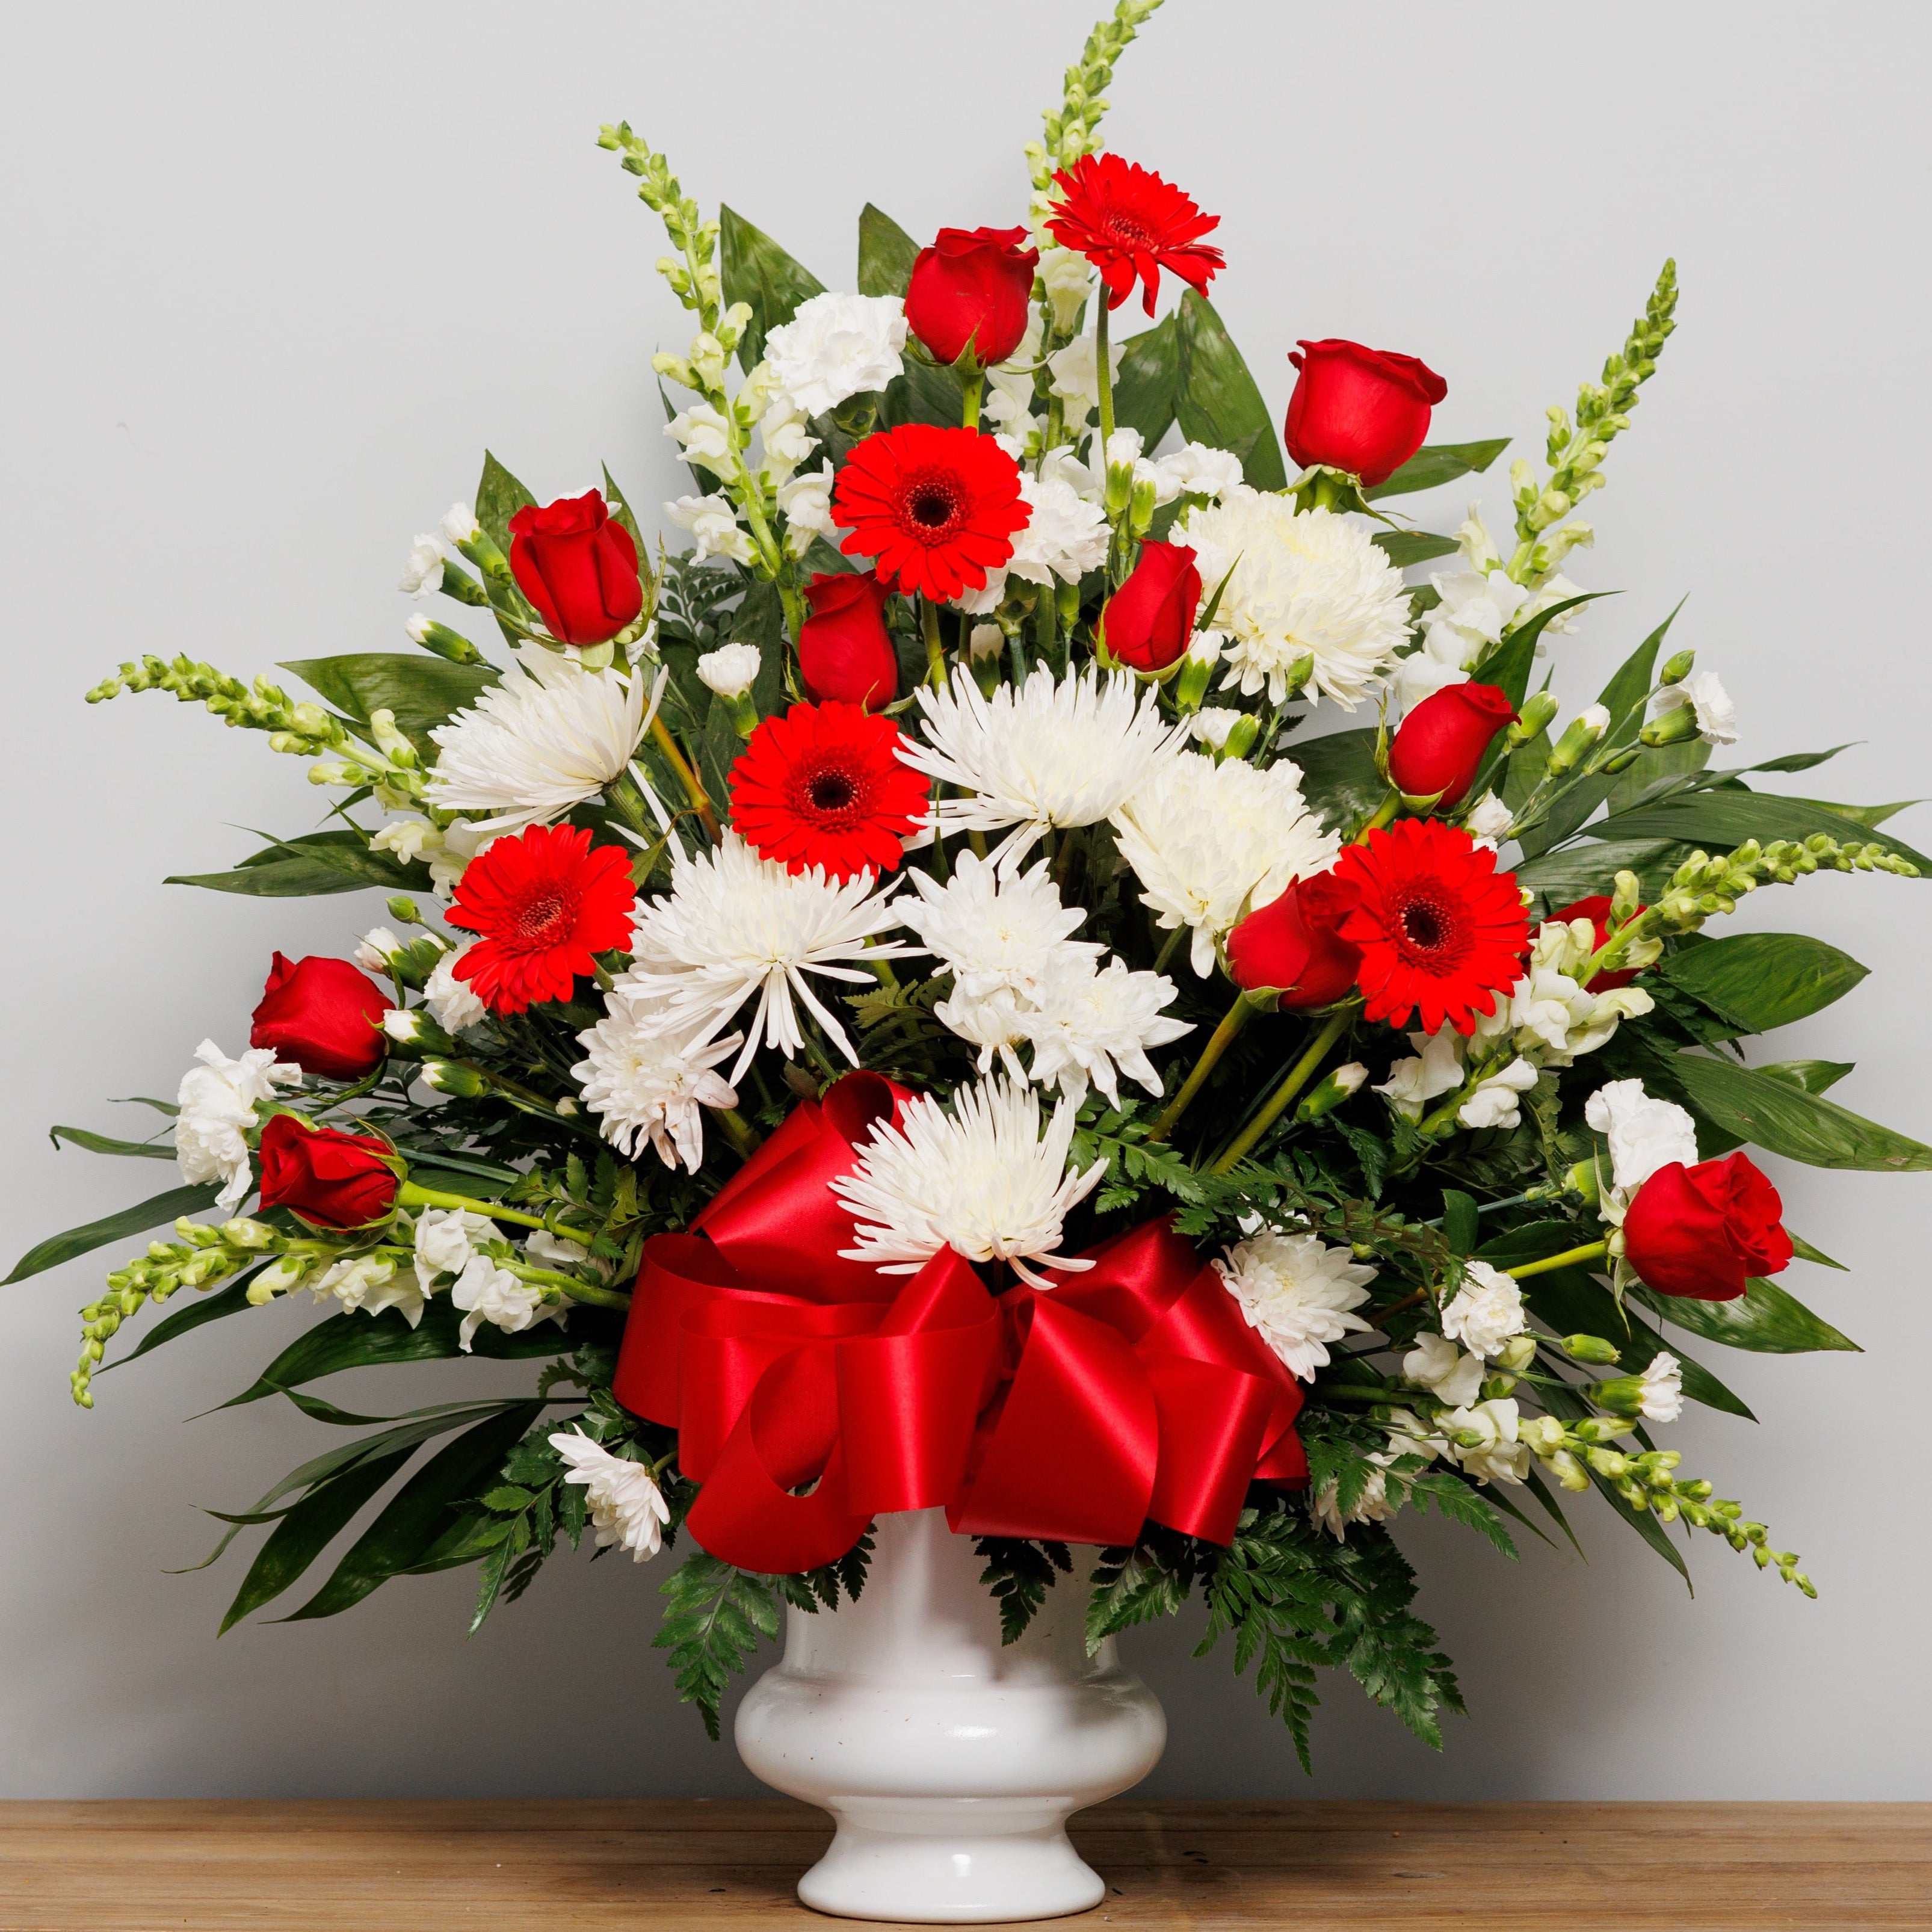 An urn arrangement with all red and white flowers.